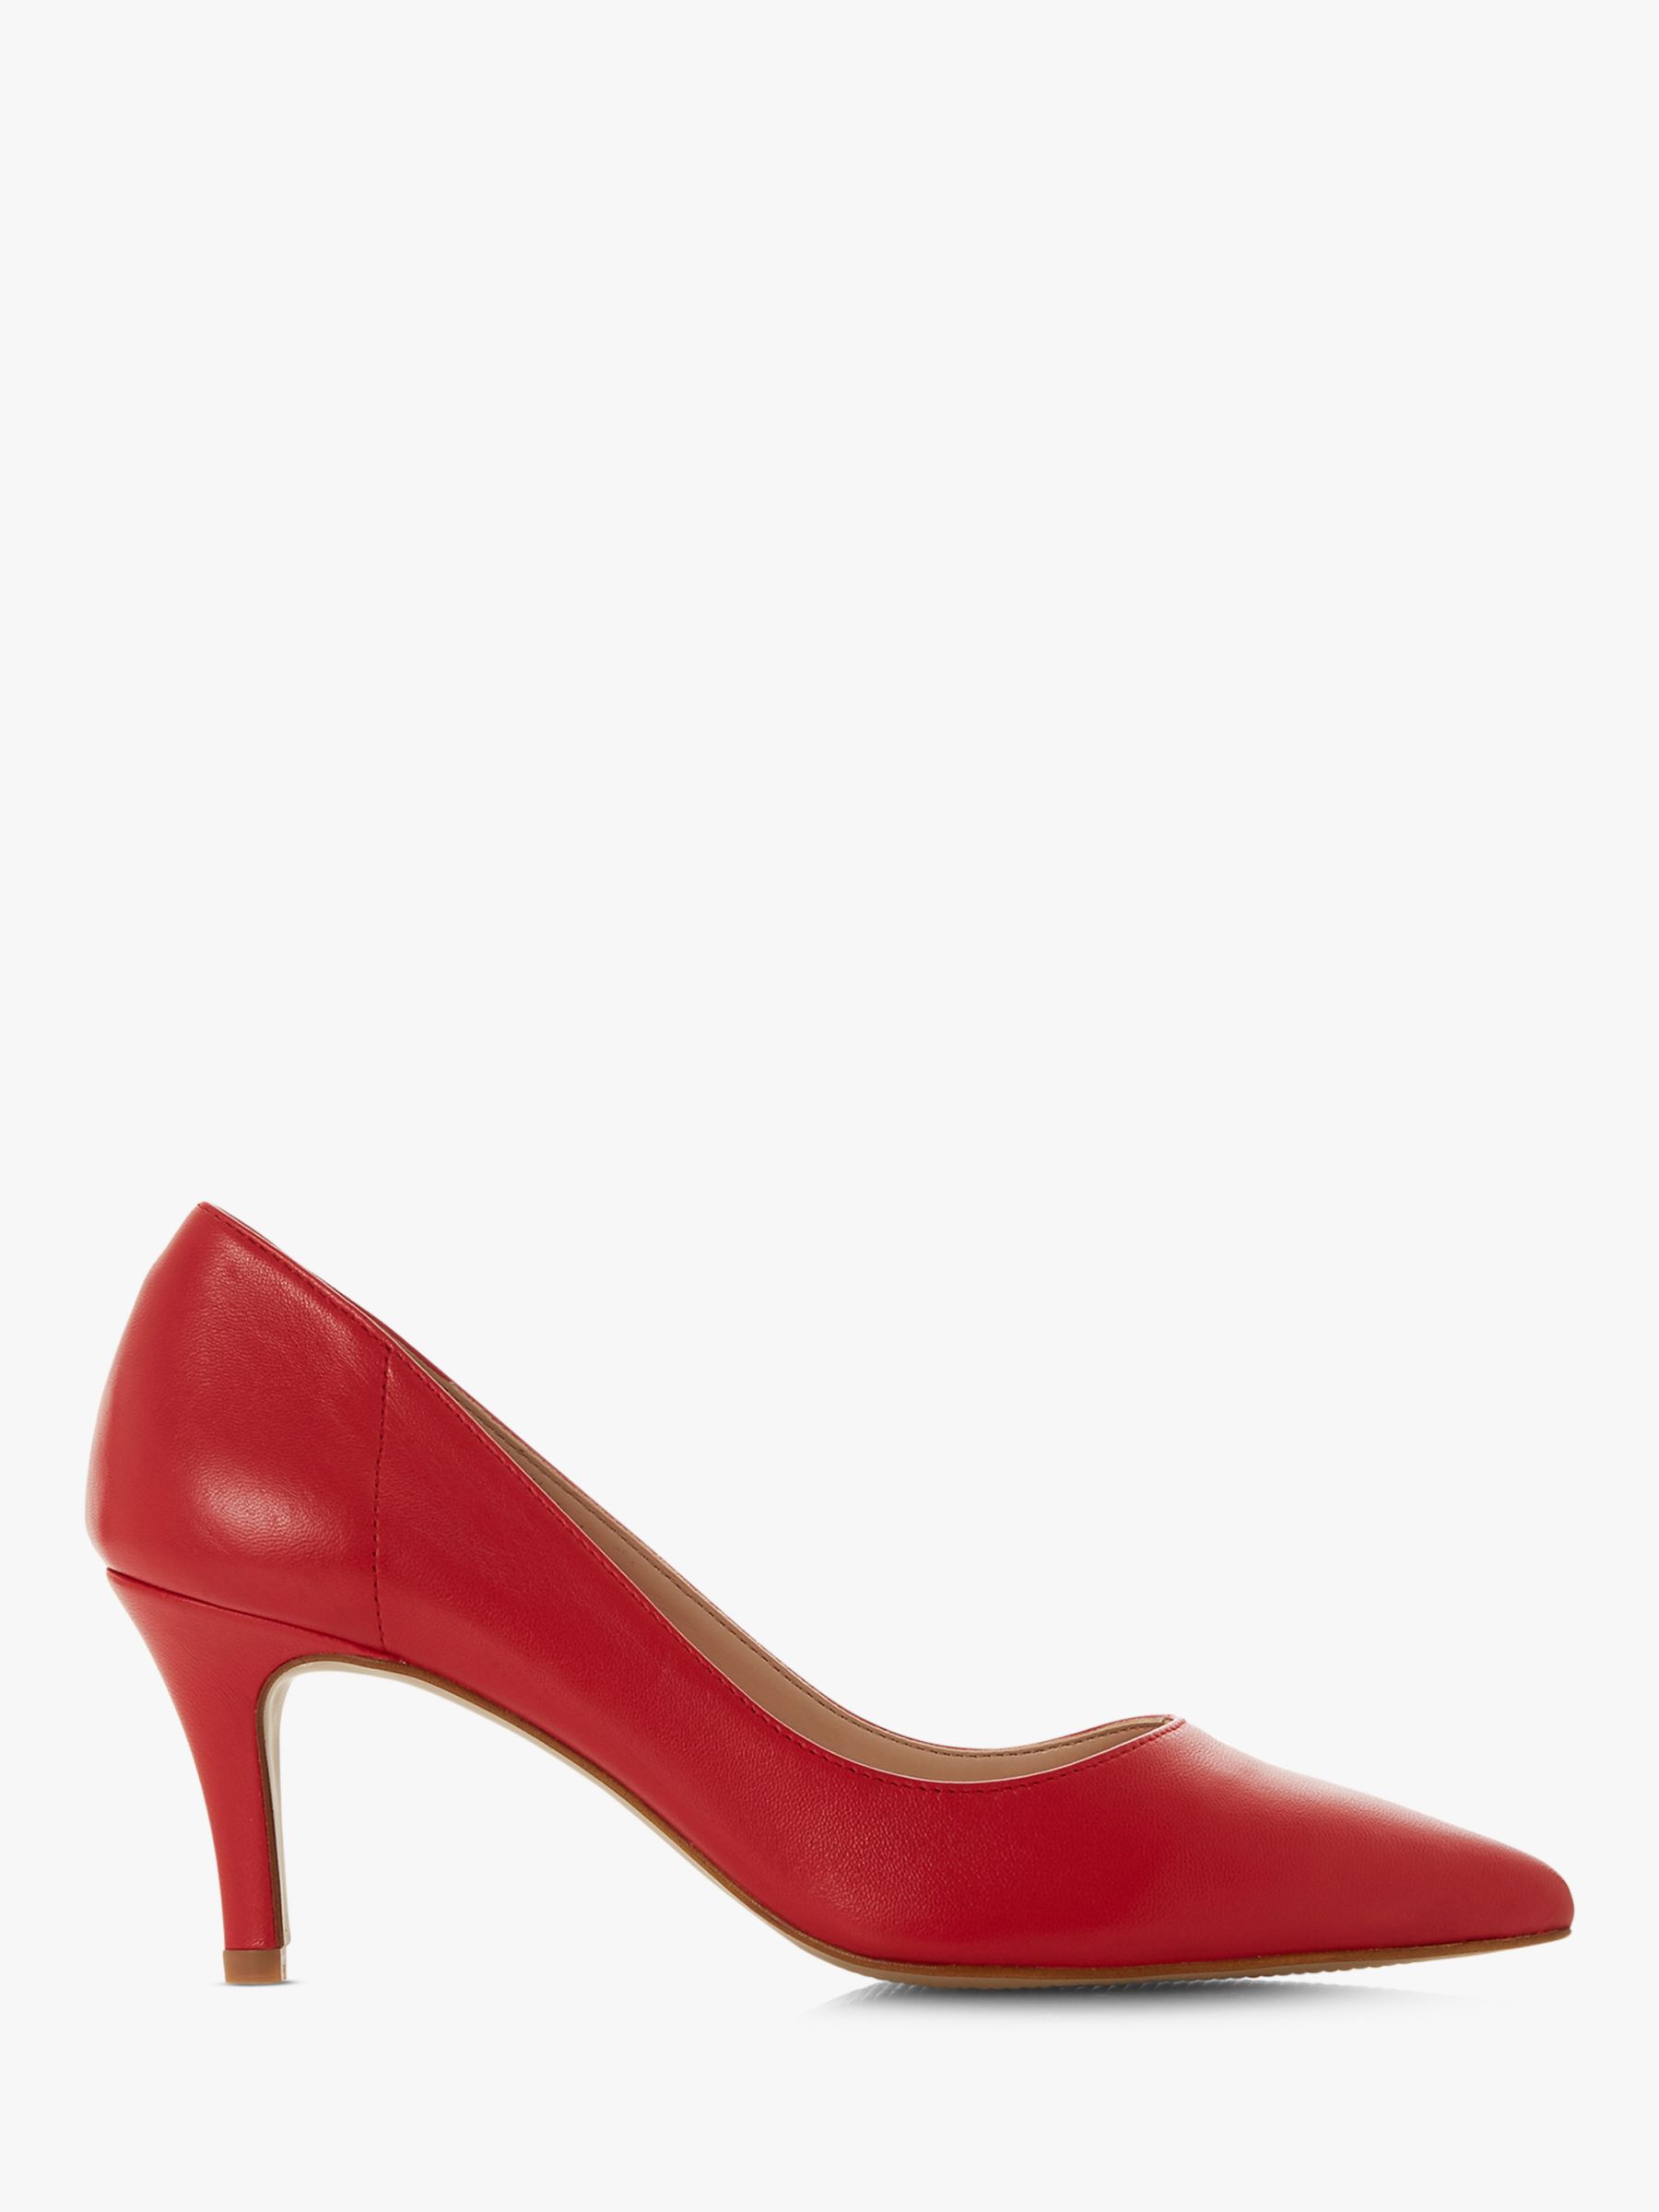 Dune Andra Kitten Heel Court Shoes, Red Leather, 6